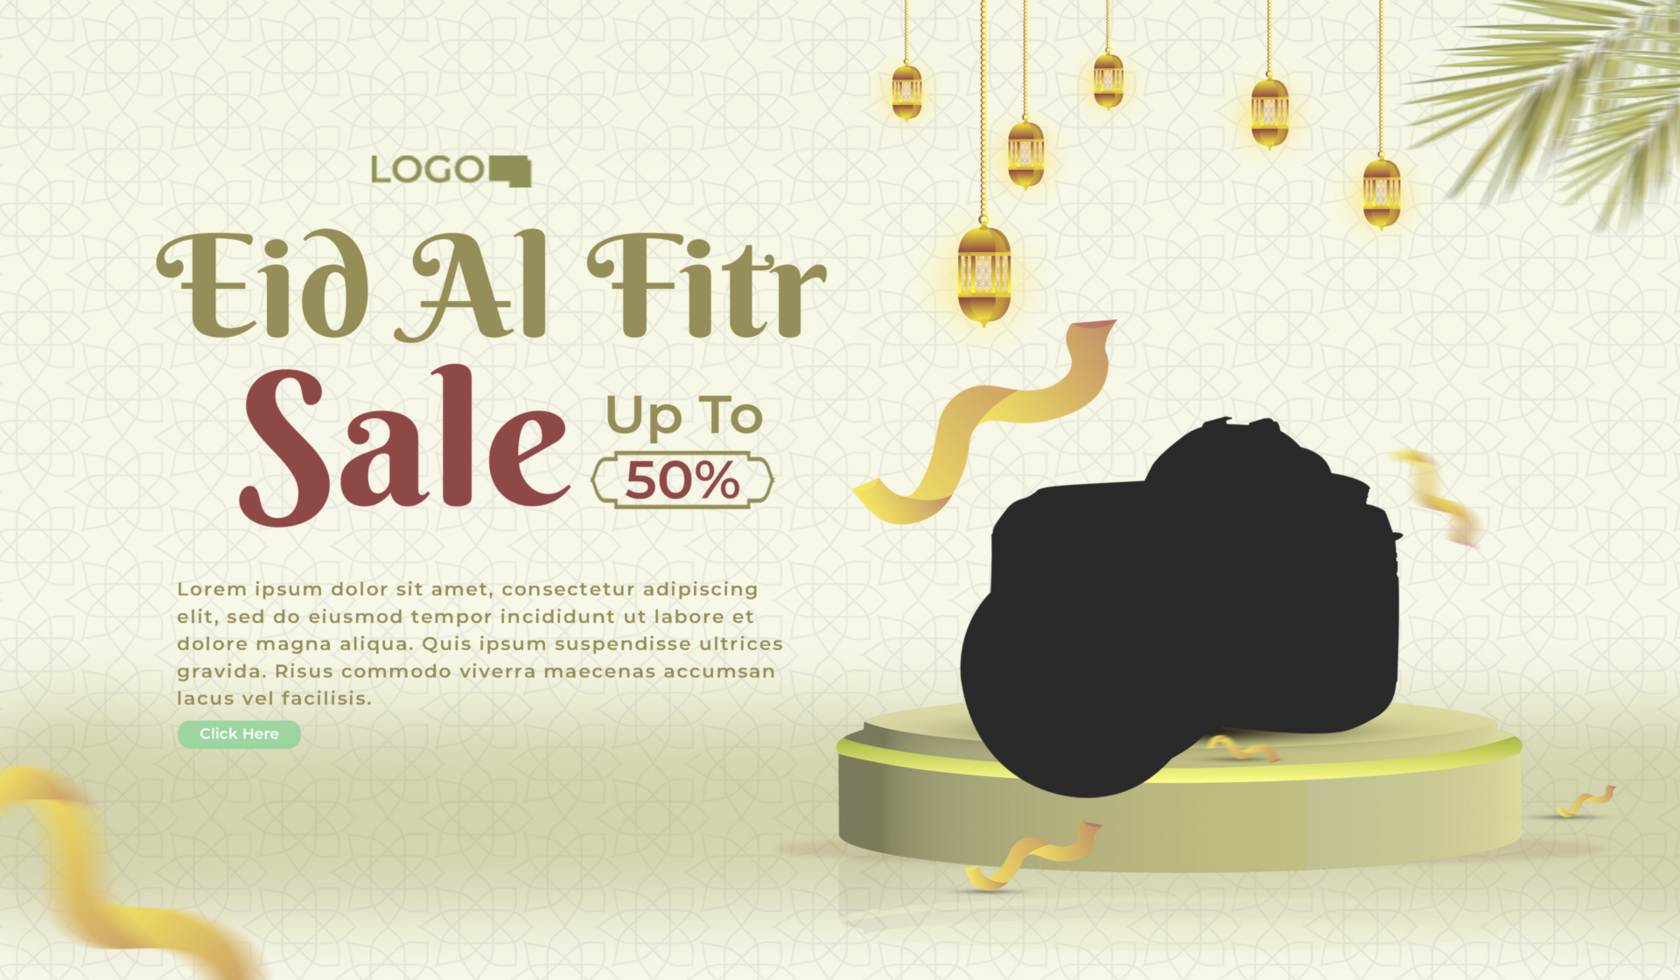 Product promotion design with 3D podium for eid al-fitr suitable for banners or others psd